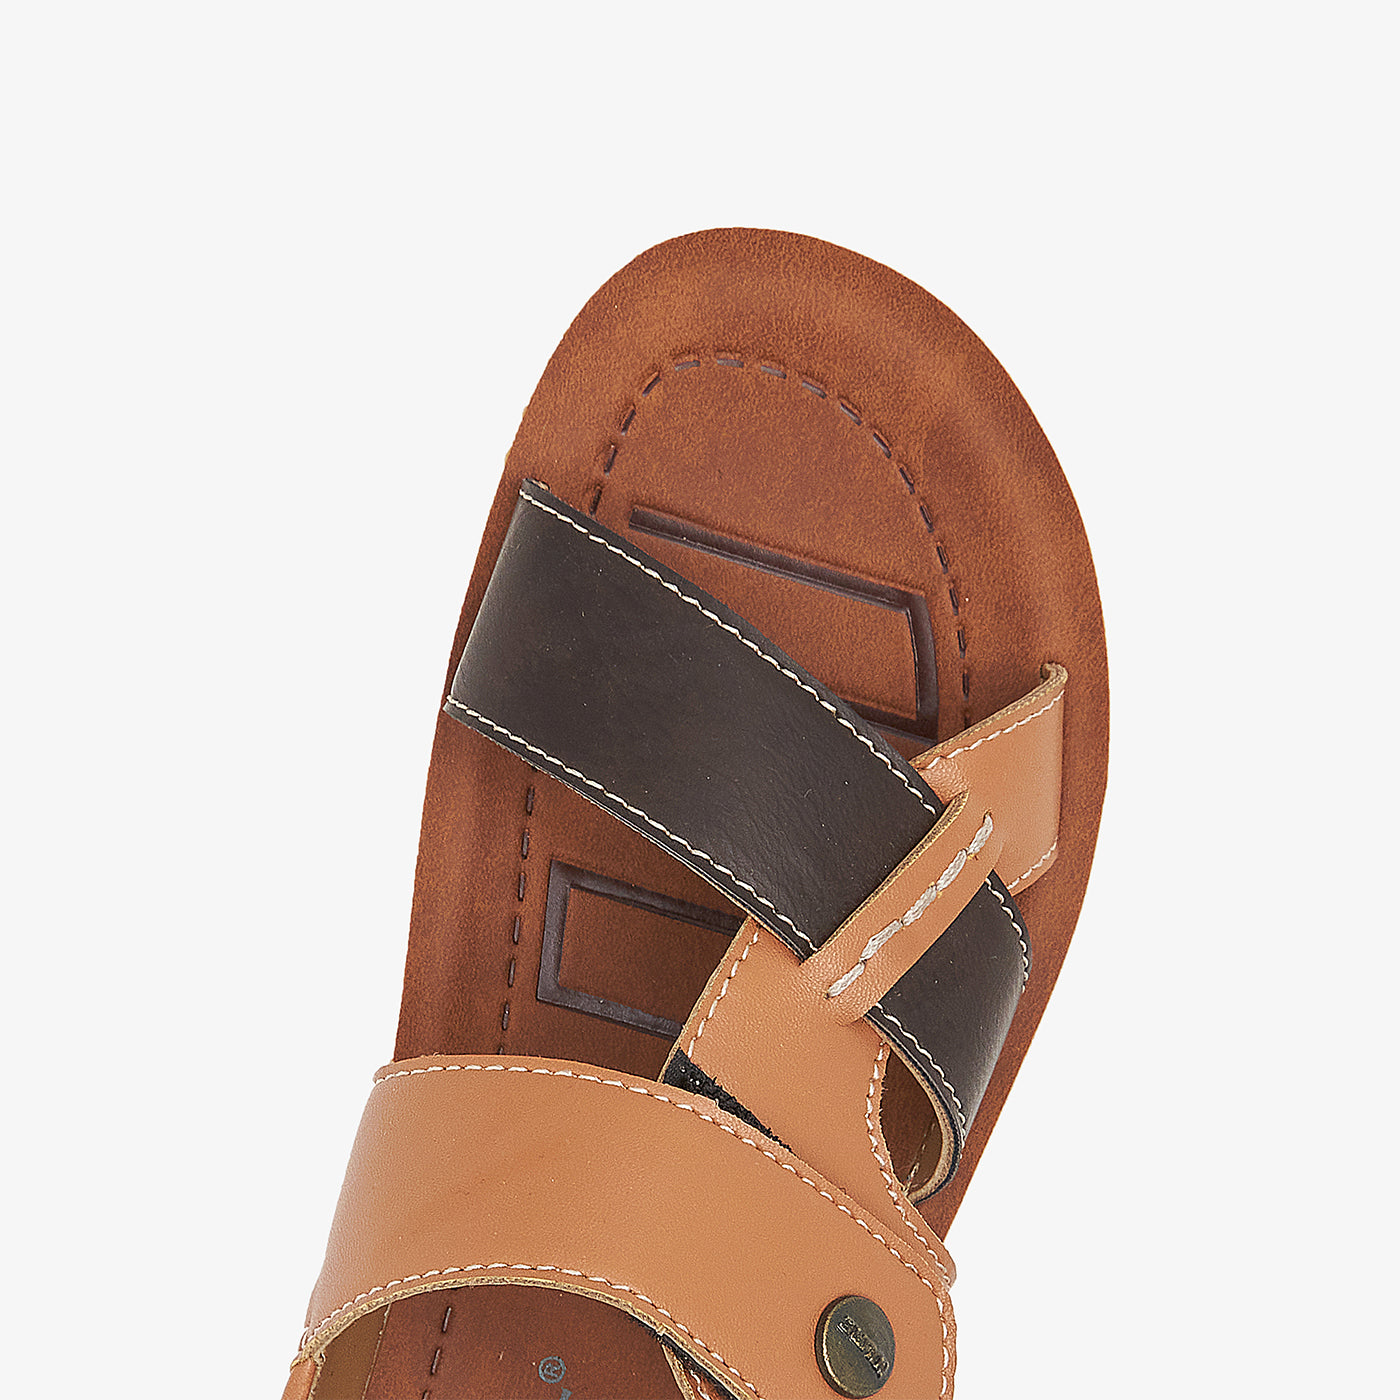 Best sandals for boys